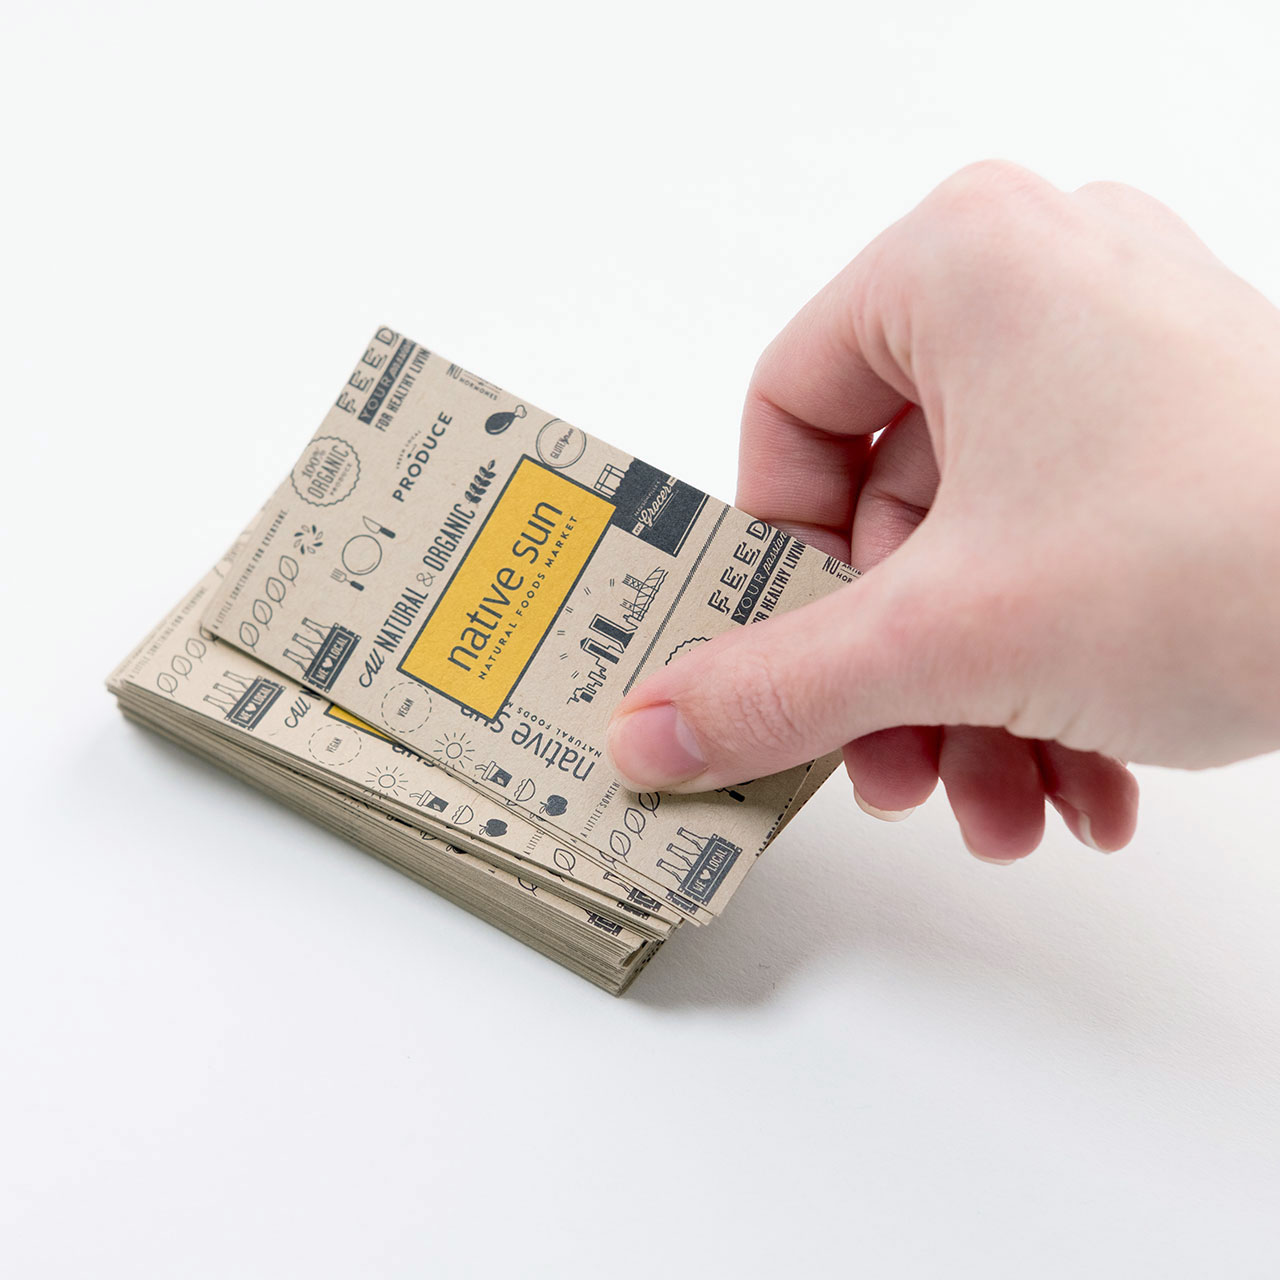 A stack of custom business cards printed on Kraft paper with a hand taking the one off the top.